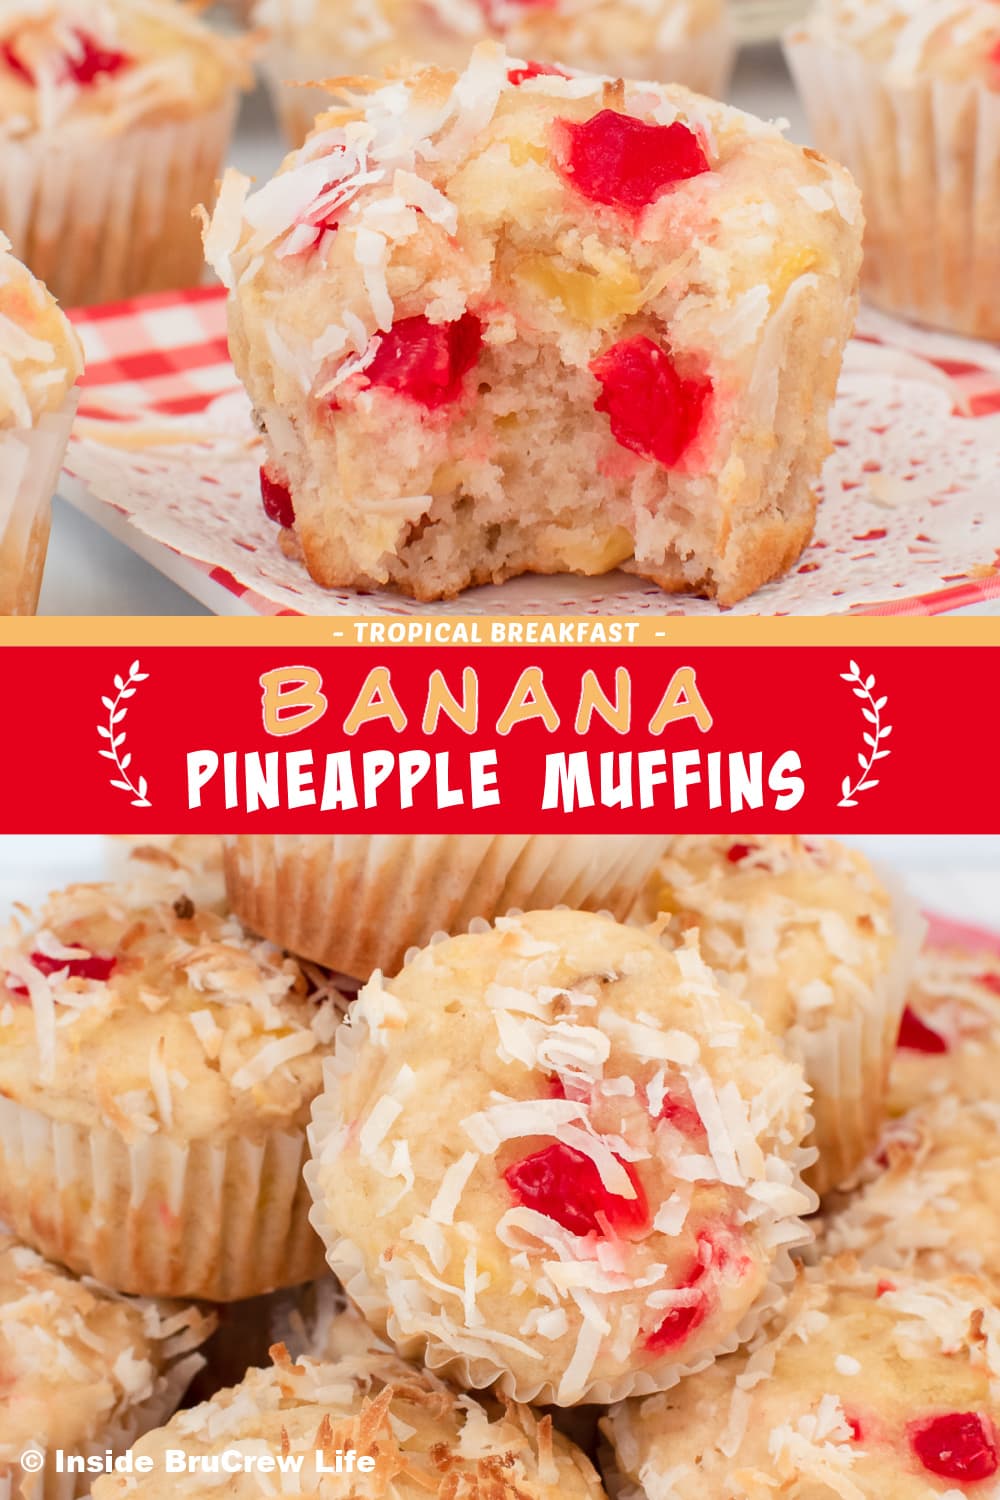 Two pictures of banana pineapple muffins collaged together with a red text box.